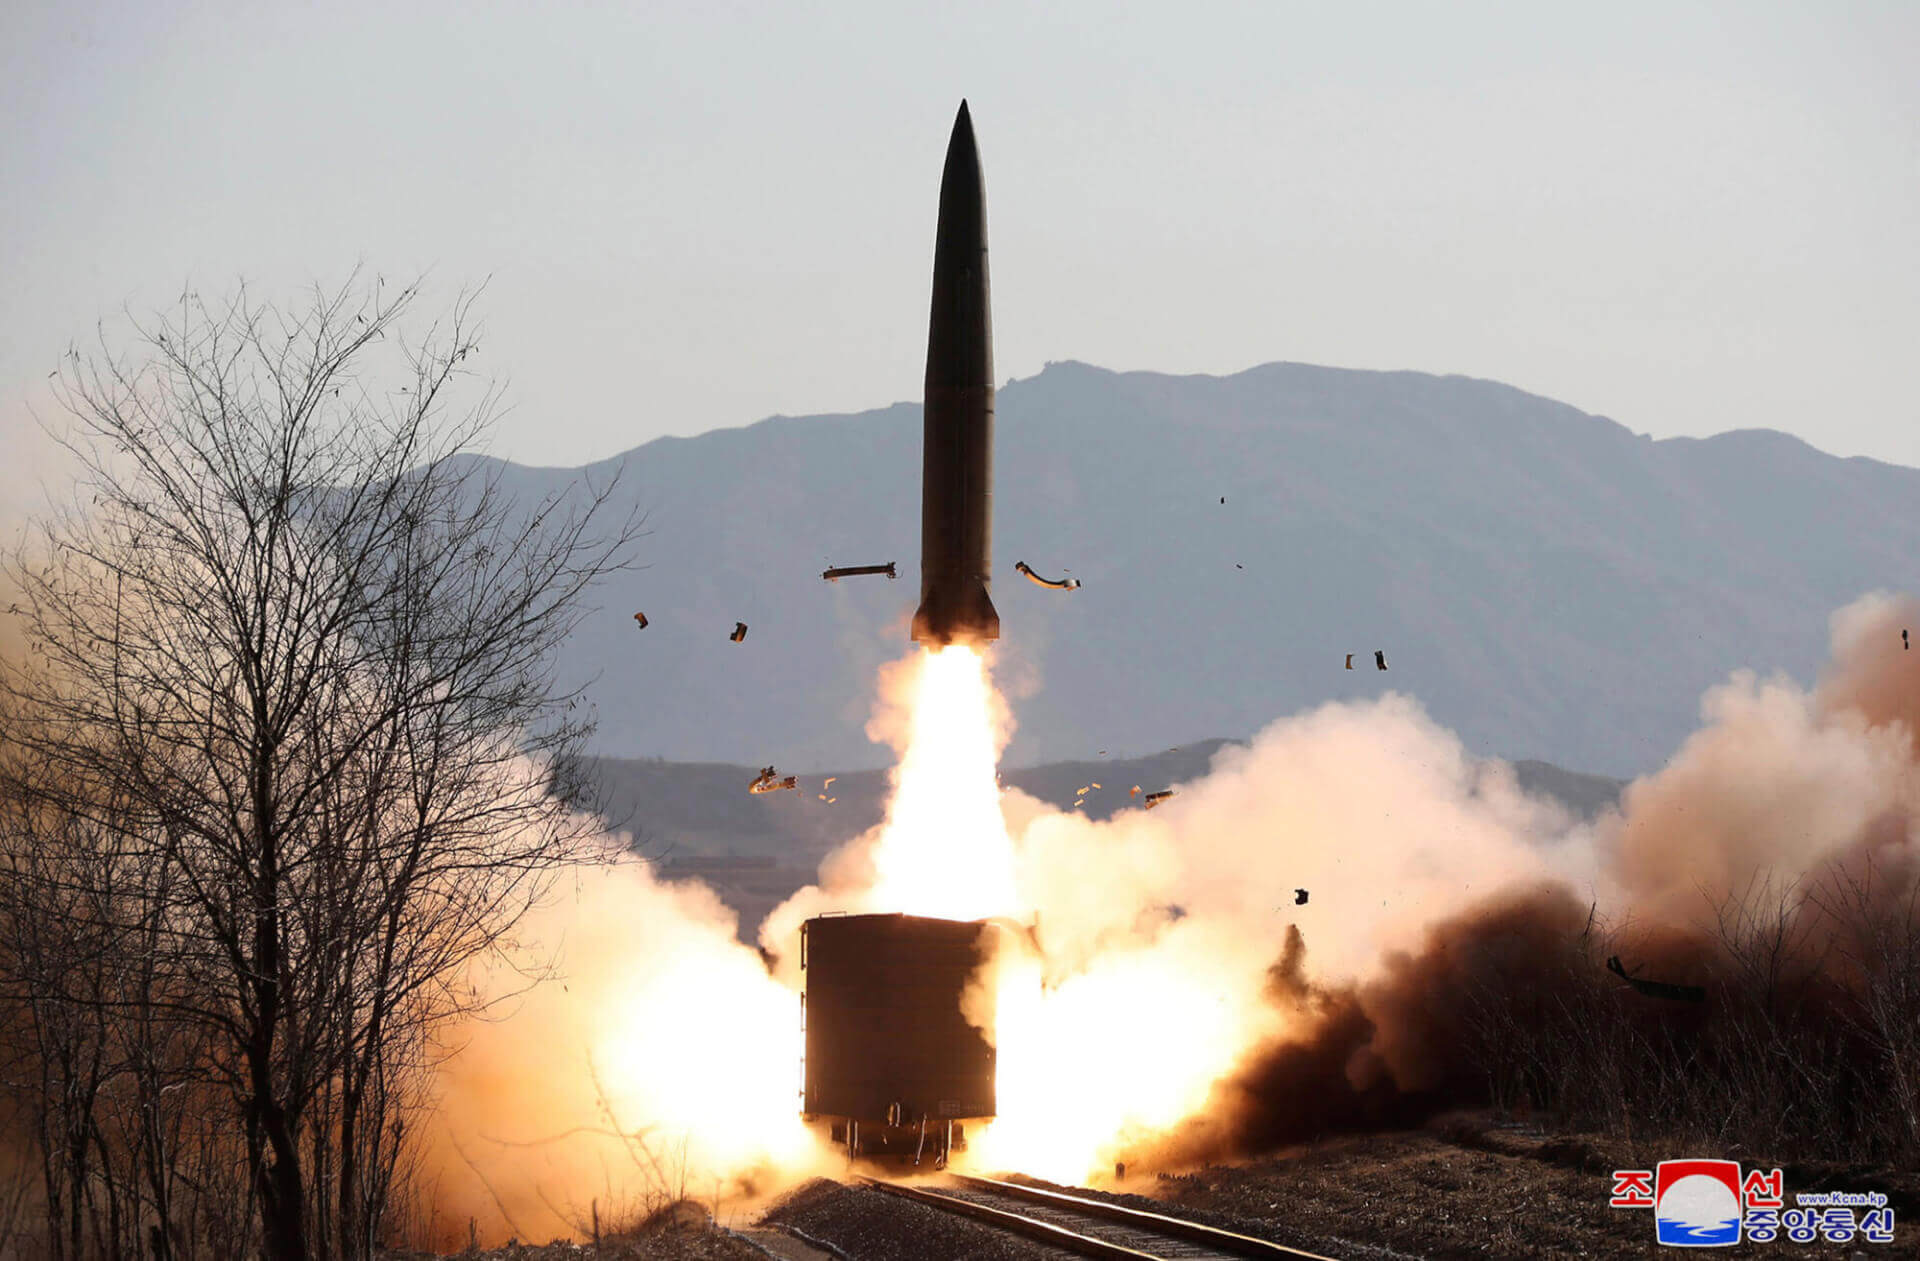 In Fourth Weapons Test This Month, North Korea Fires Two More Ballistic Missiles